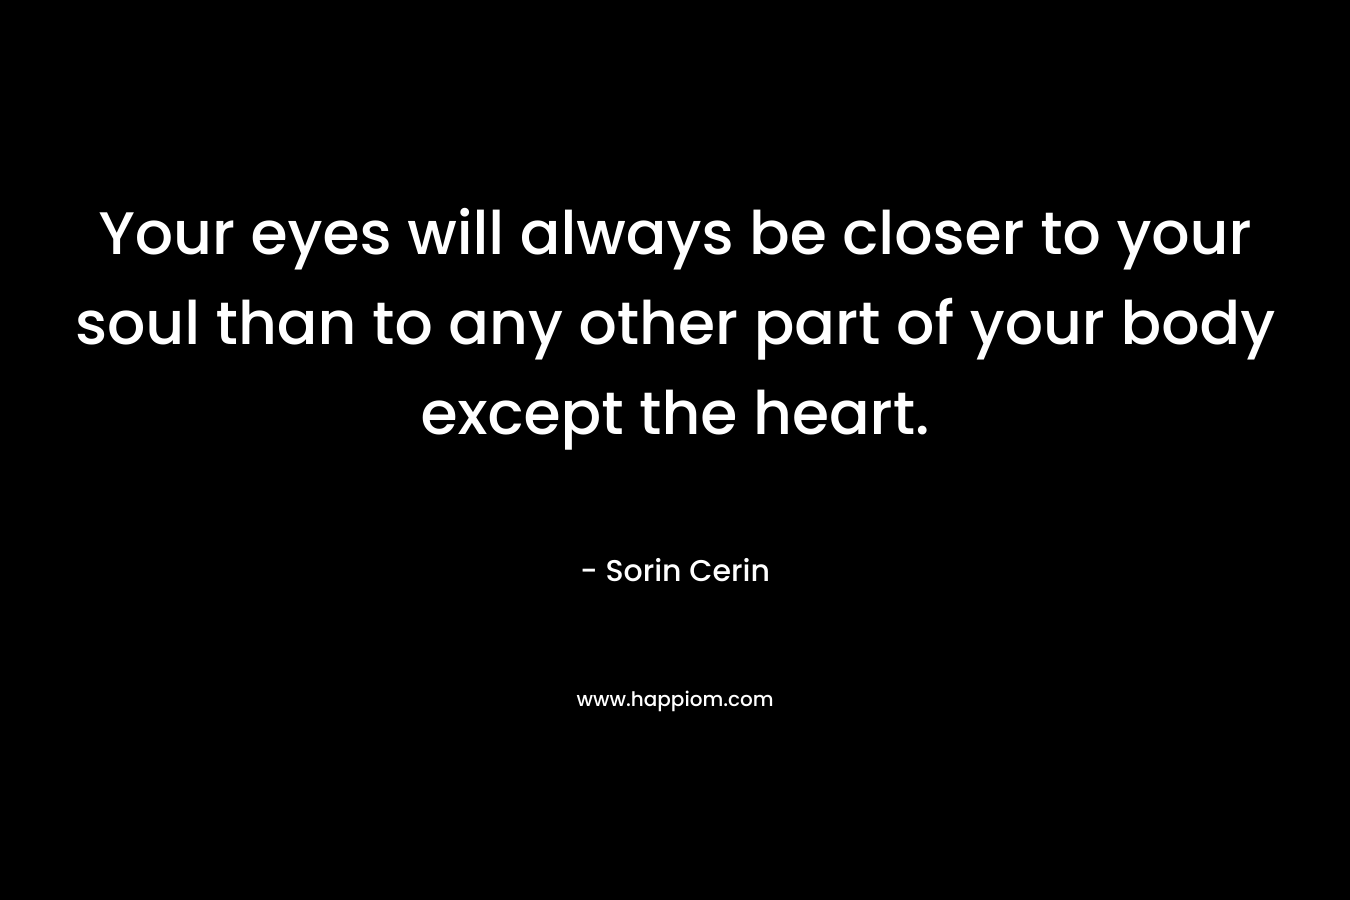 Your eyes will always be closer to your soul than to any other part of your body except the heart.